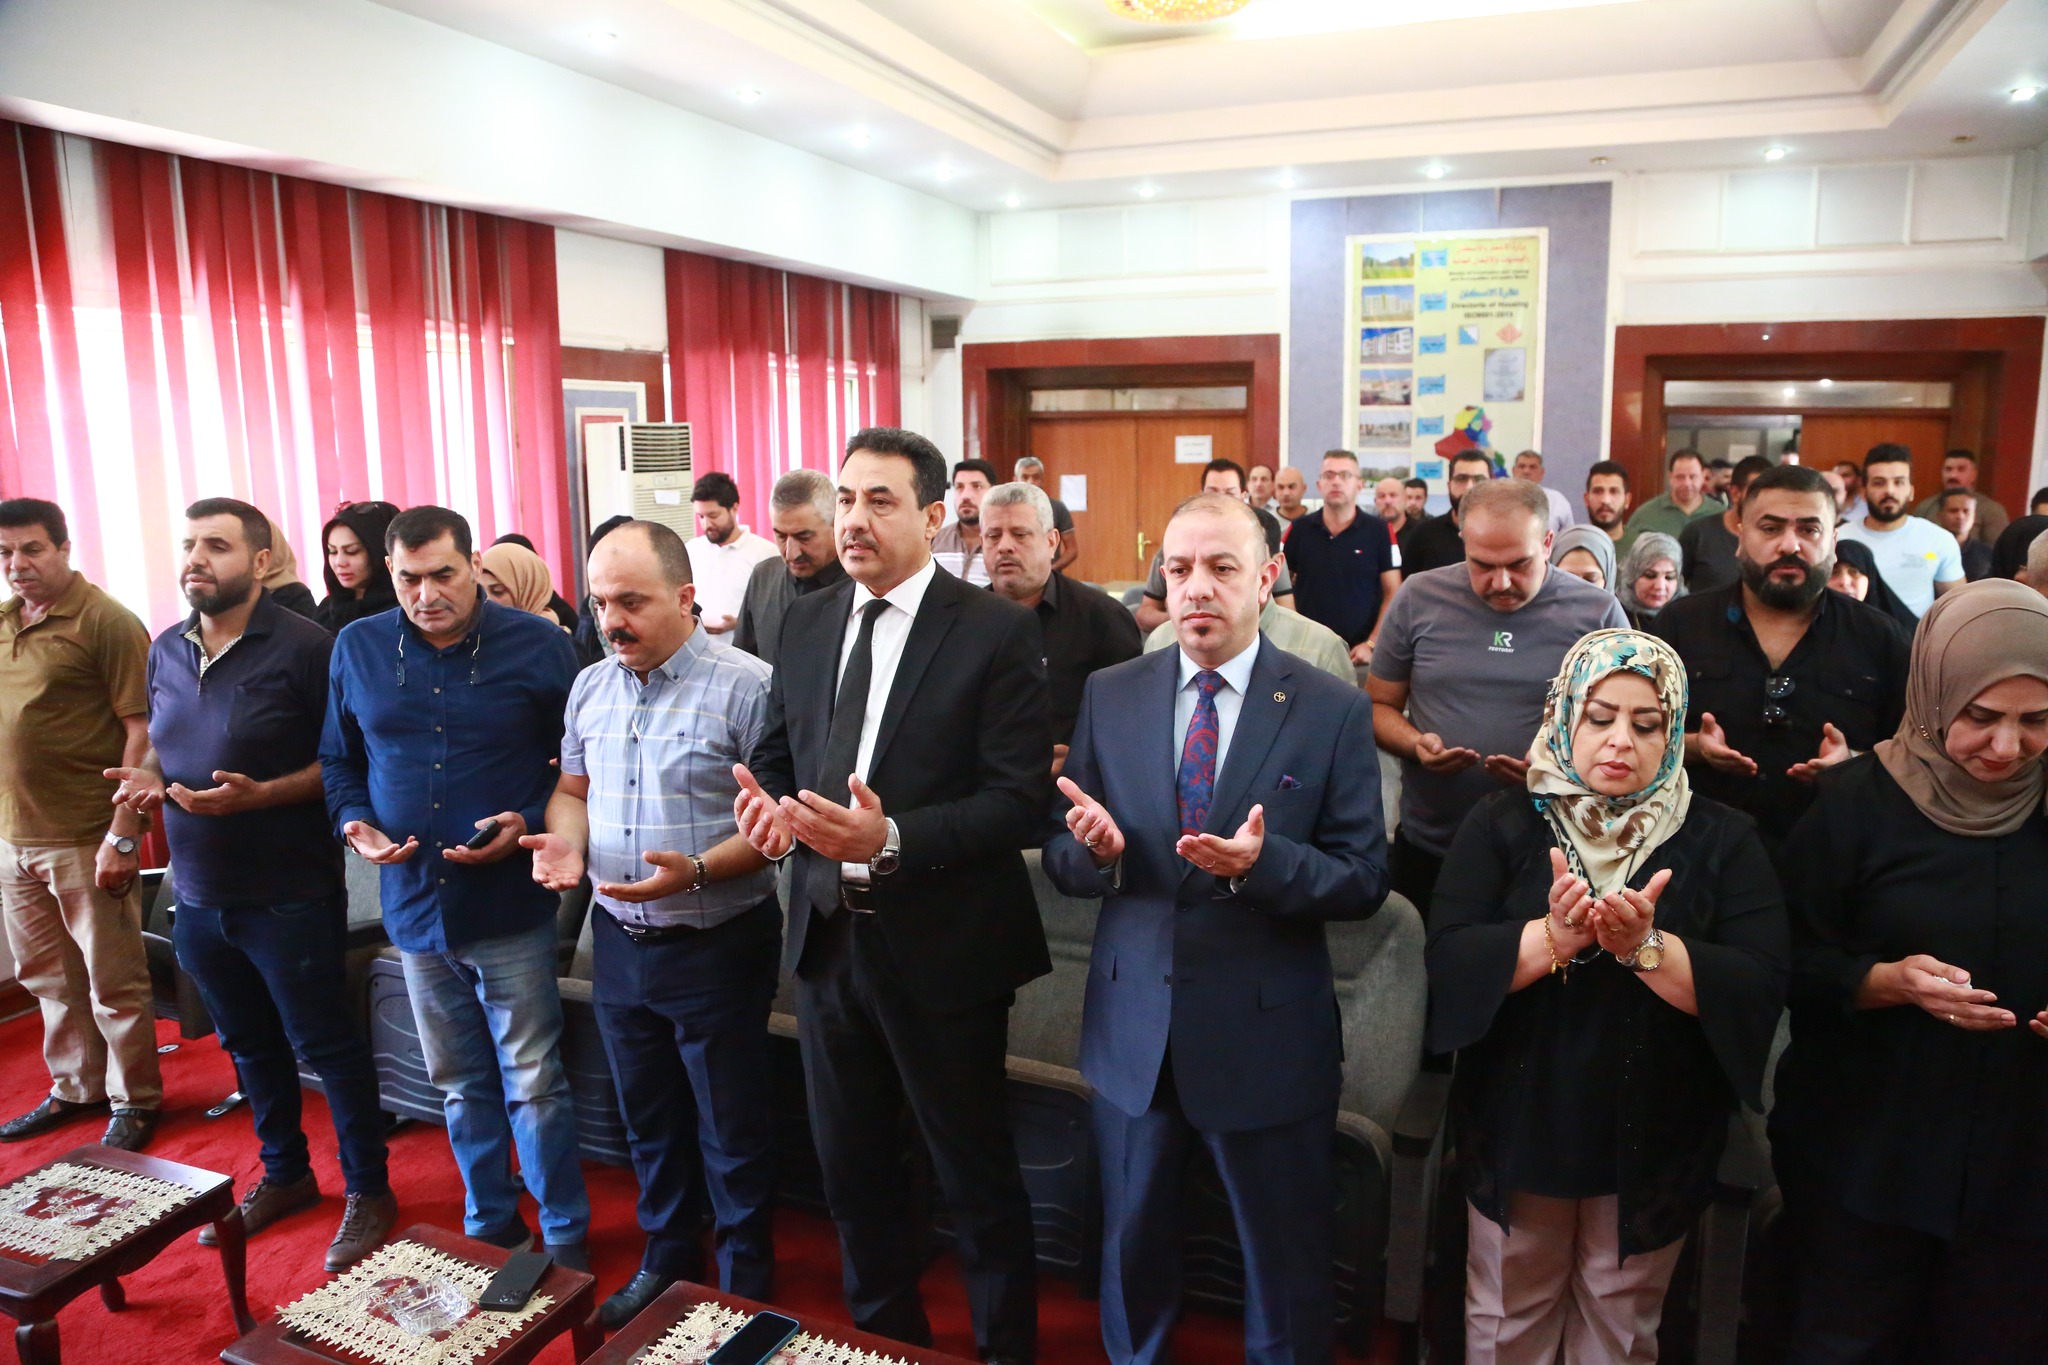 The Directorate of Housing organizes a condolence gathering at the Directorate’s headquarters.